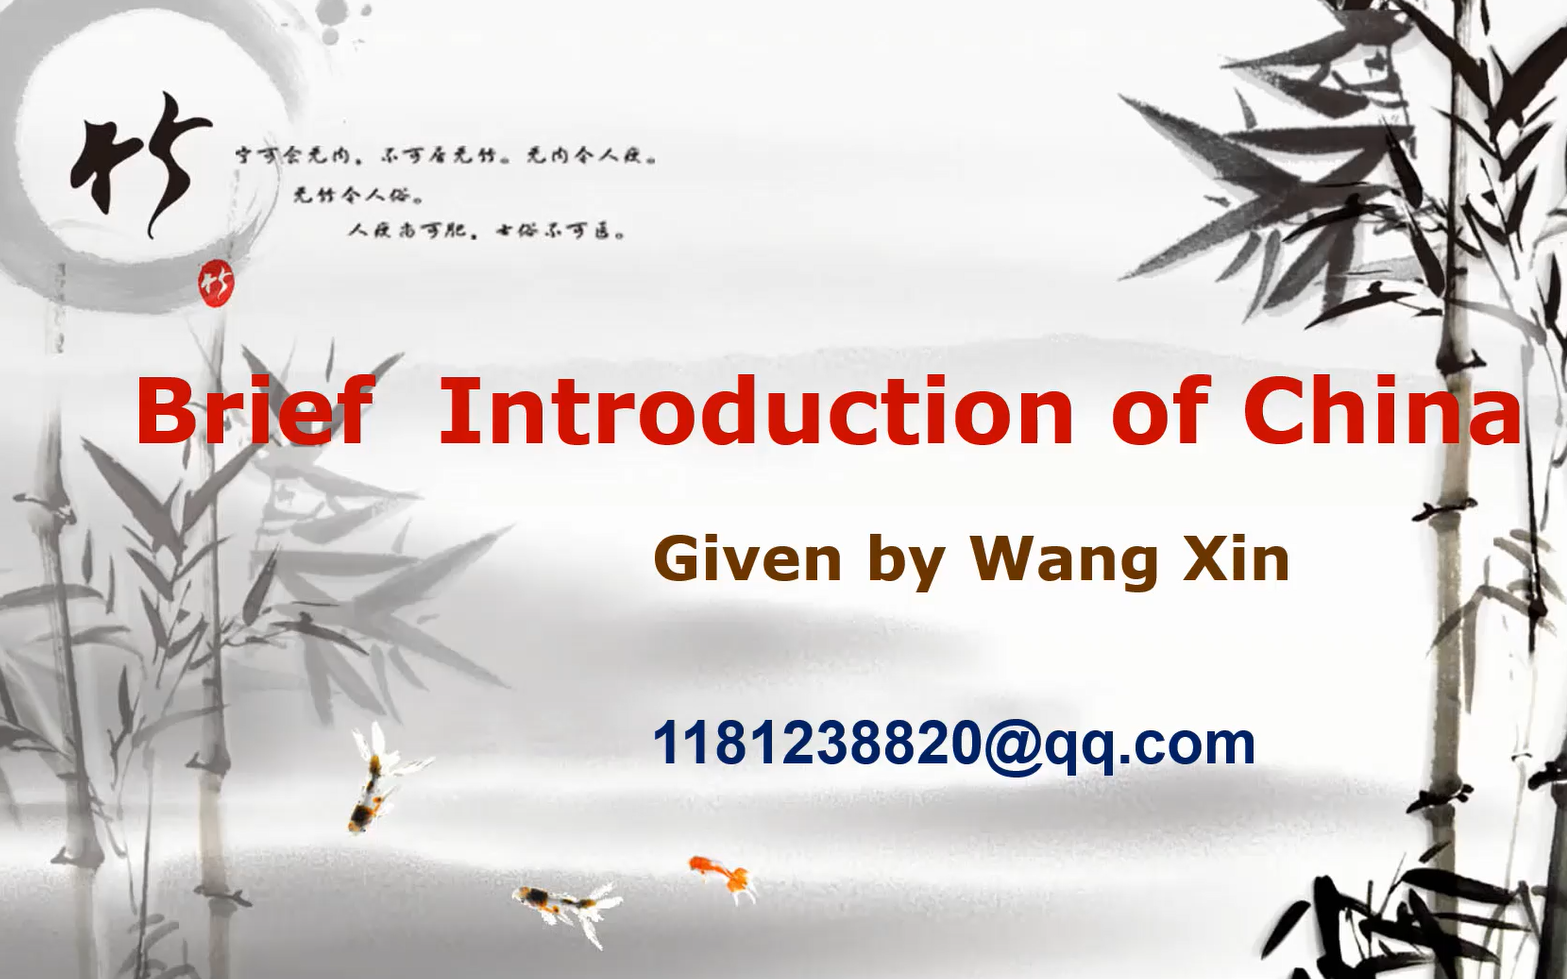 Brief introduction of China